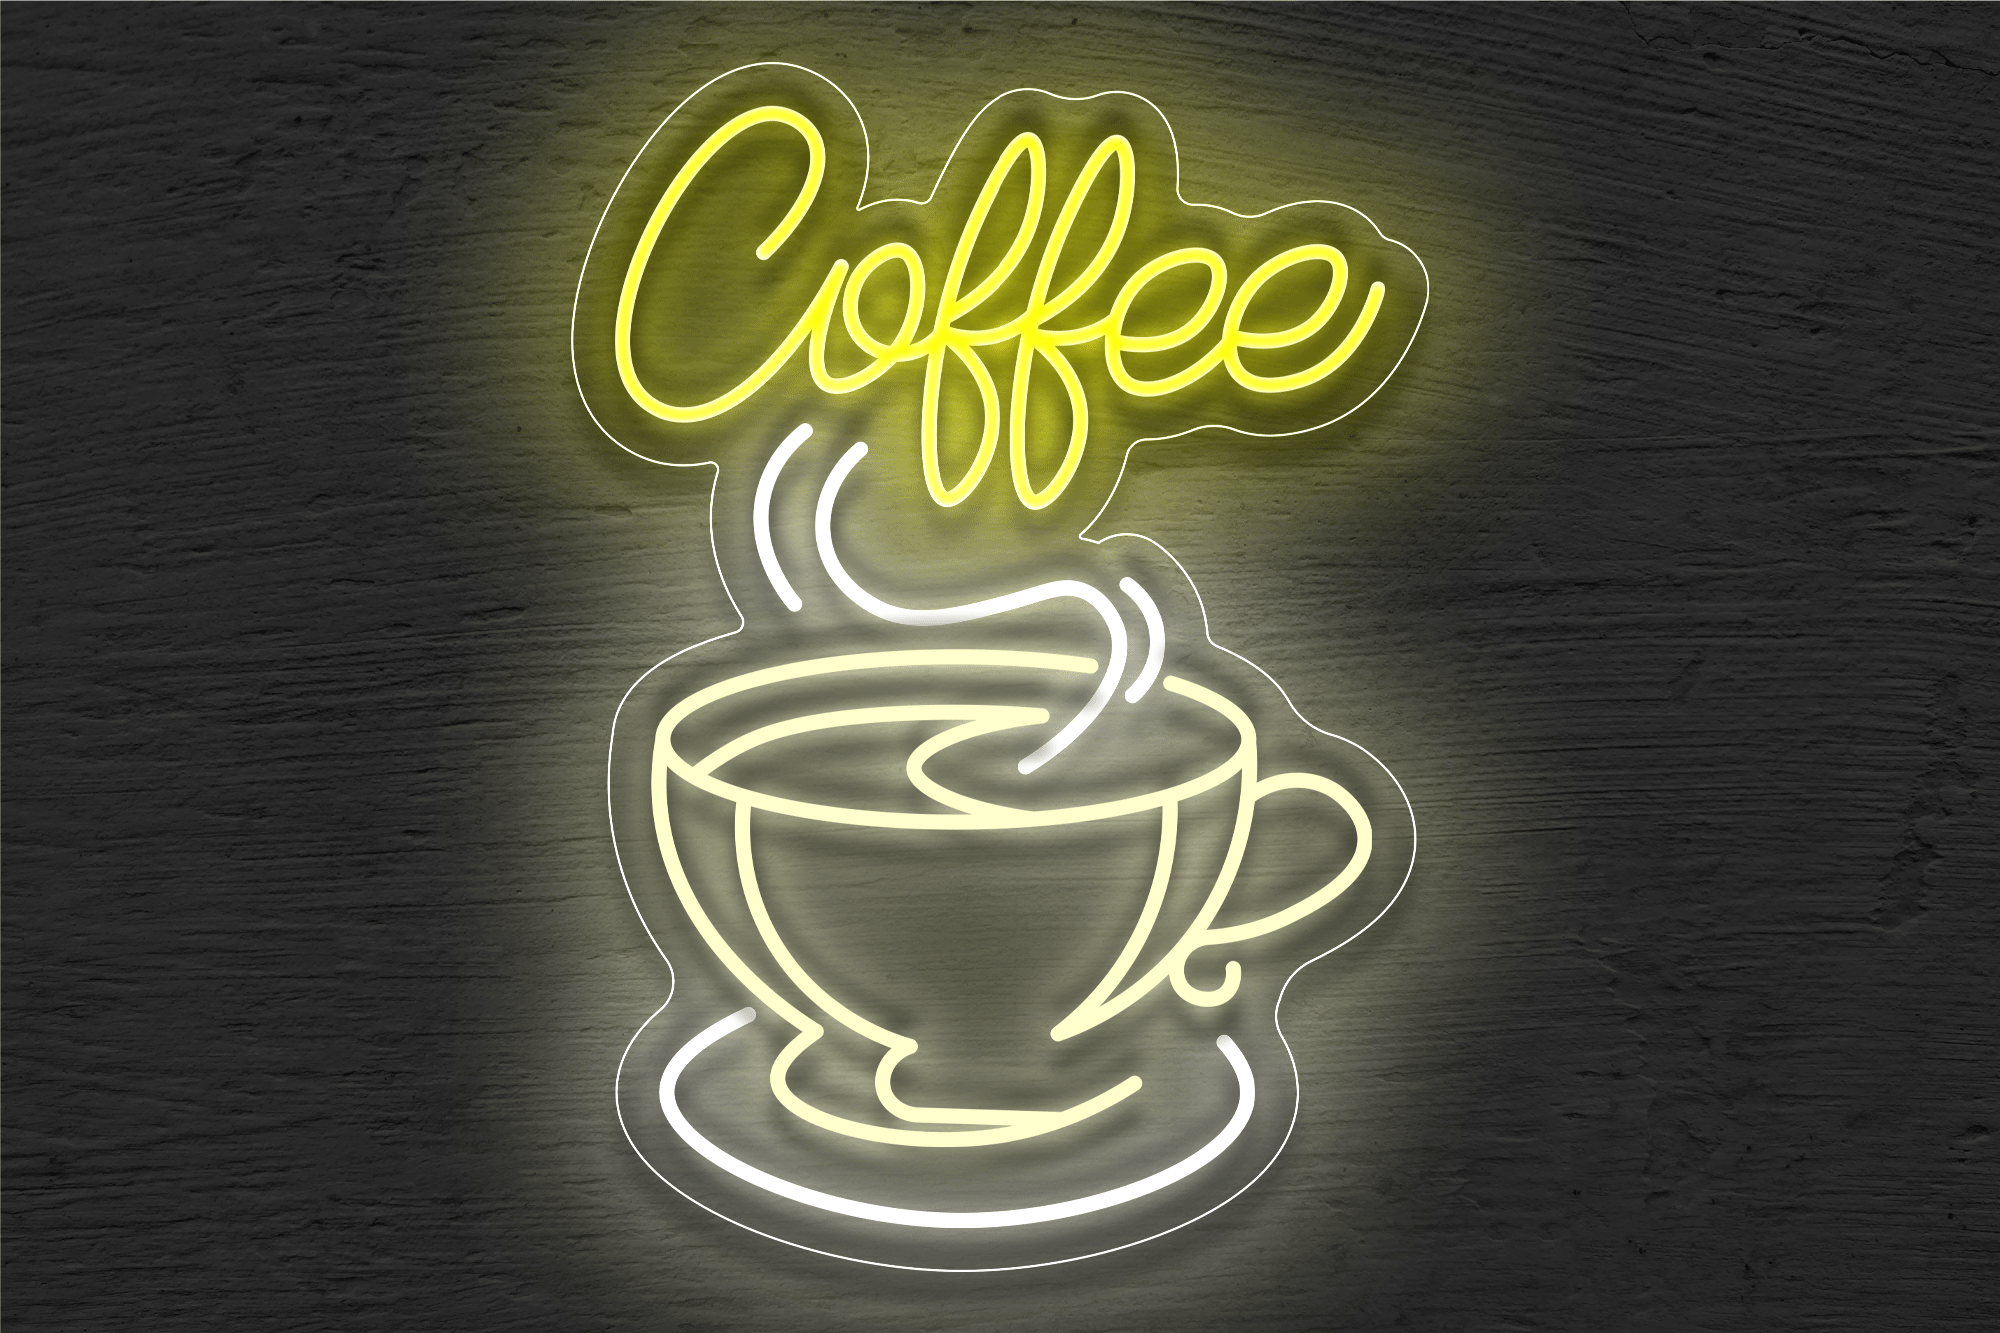 "Coffee" with Smoking Cup LED Neon Sign